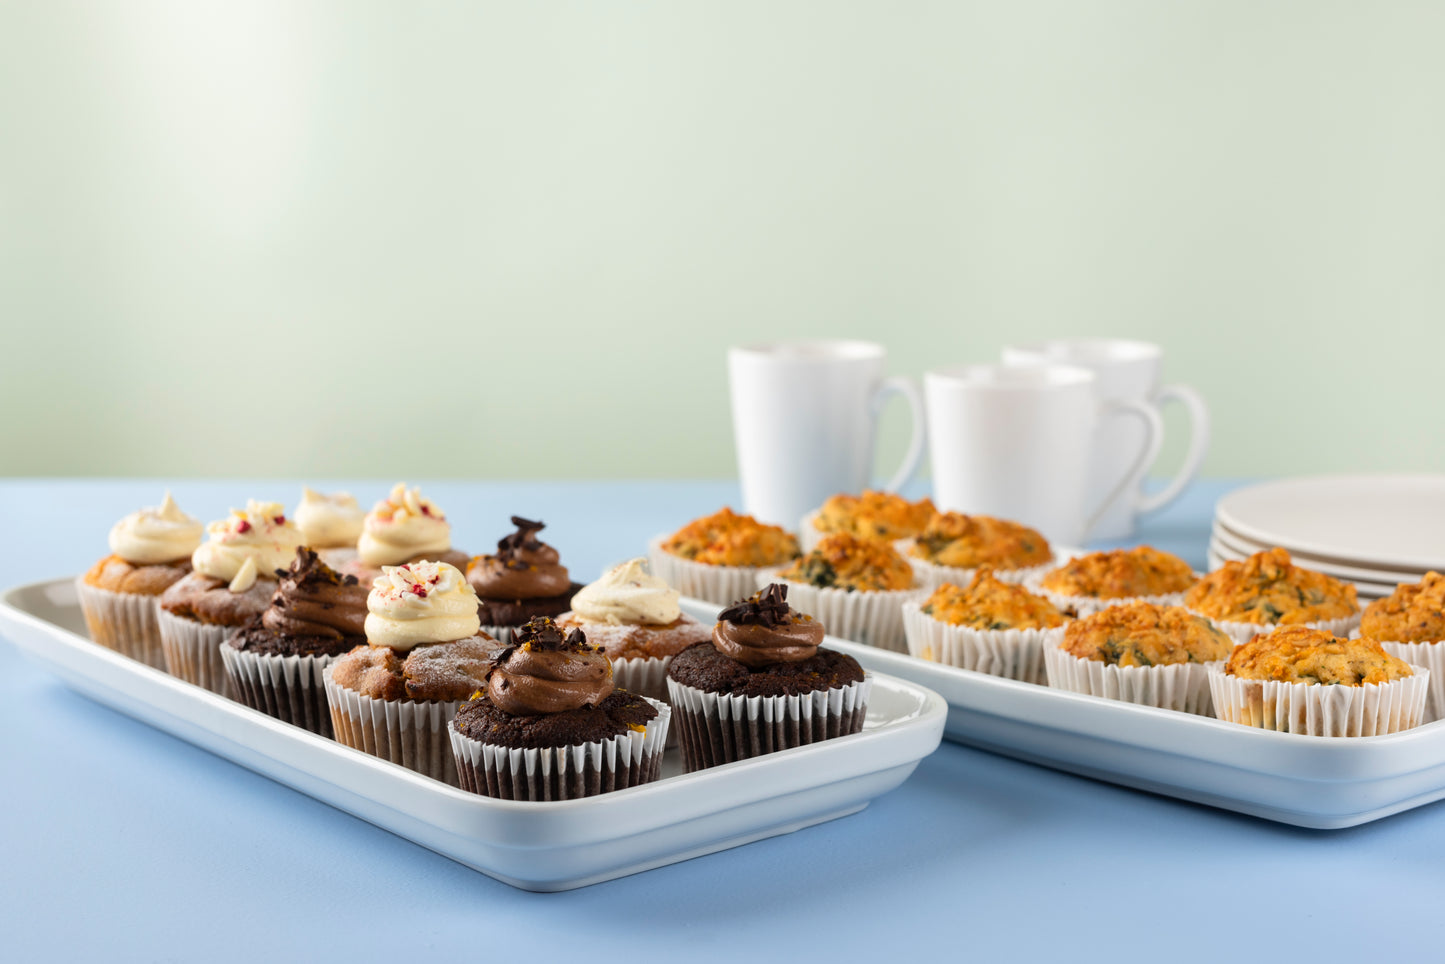 Meetings & Events Assortment - 12 Mixed Cupcakes & Savoury Muffins